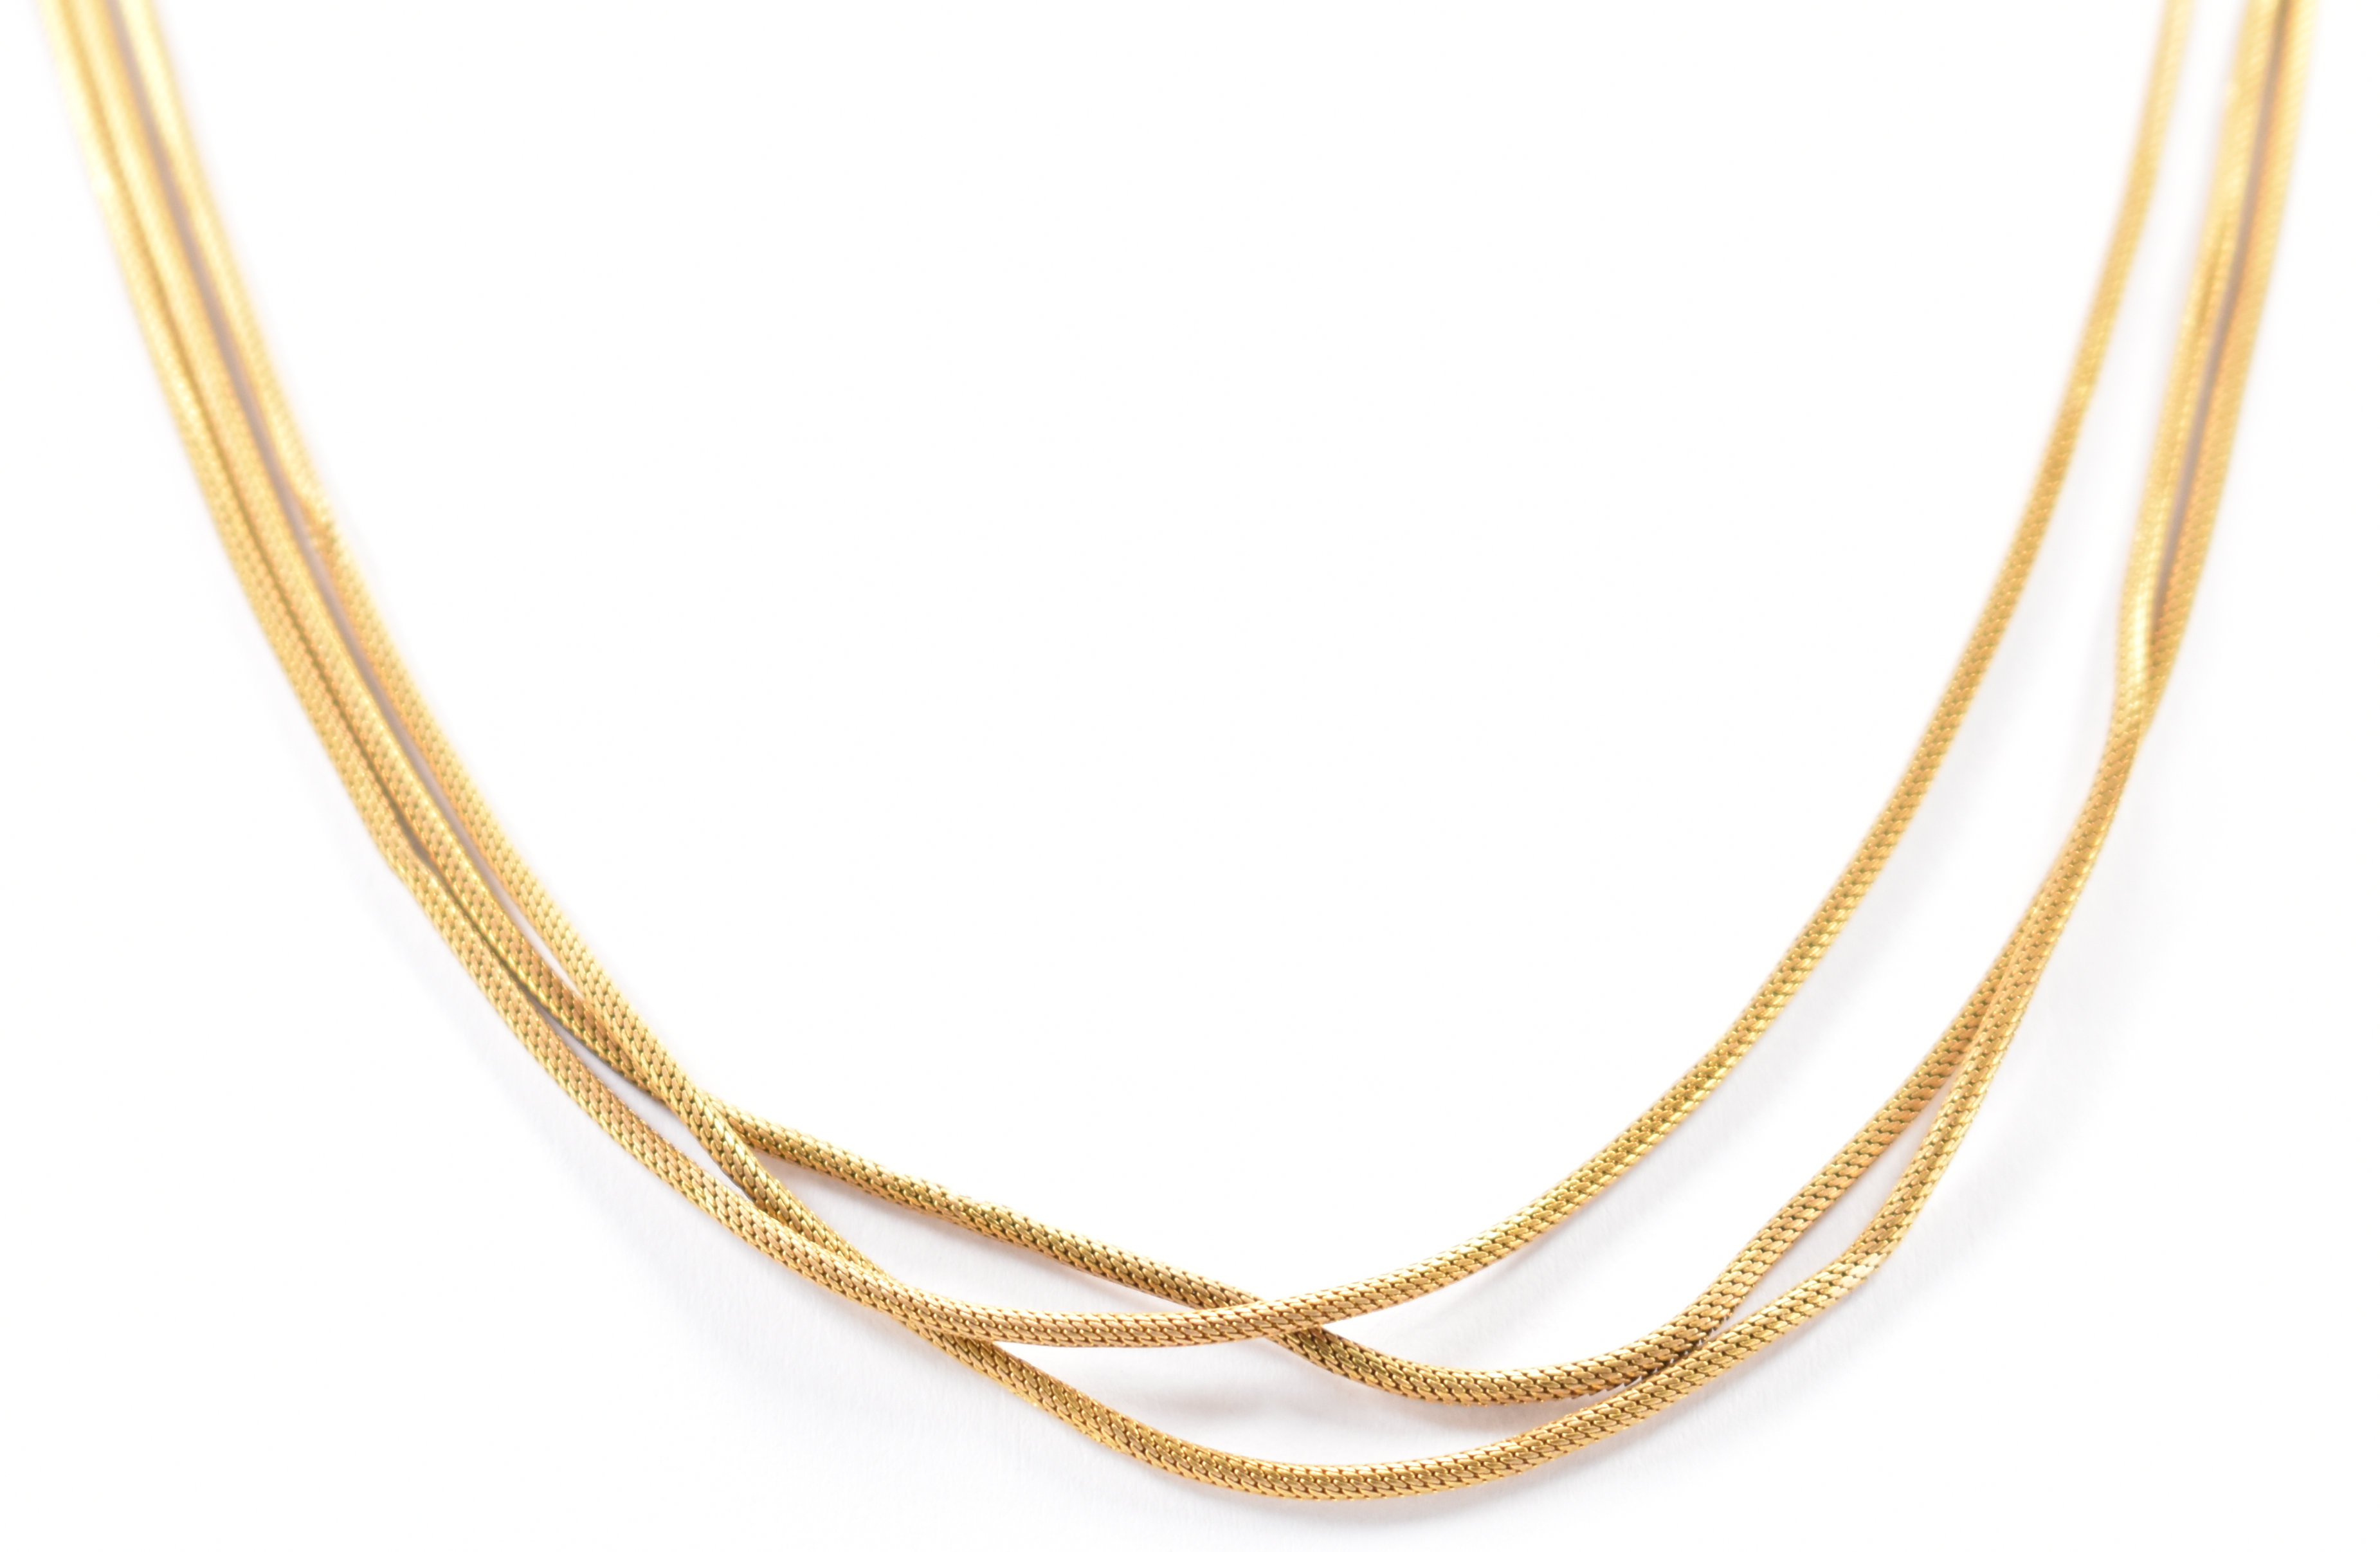 EARLY 20TH CENTURY GOLD NECKLACE CHAIN